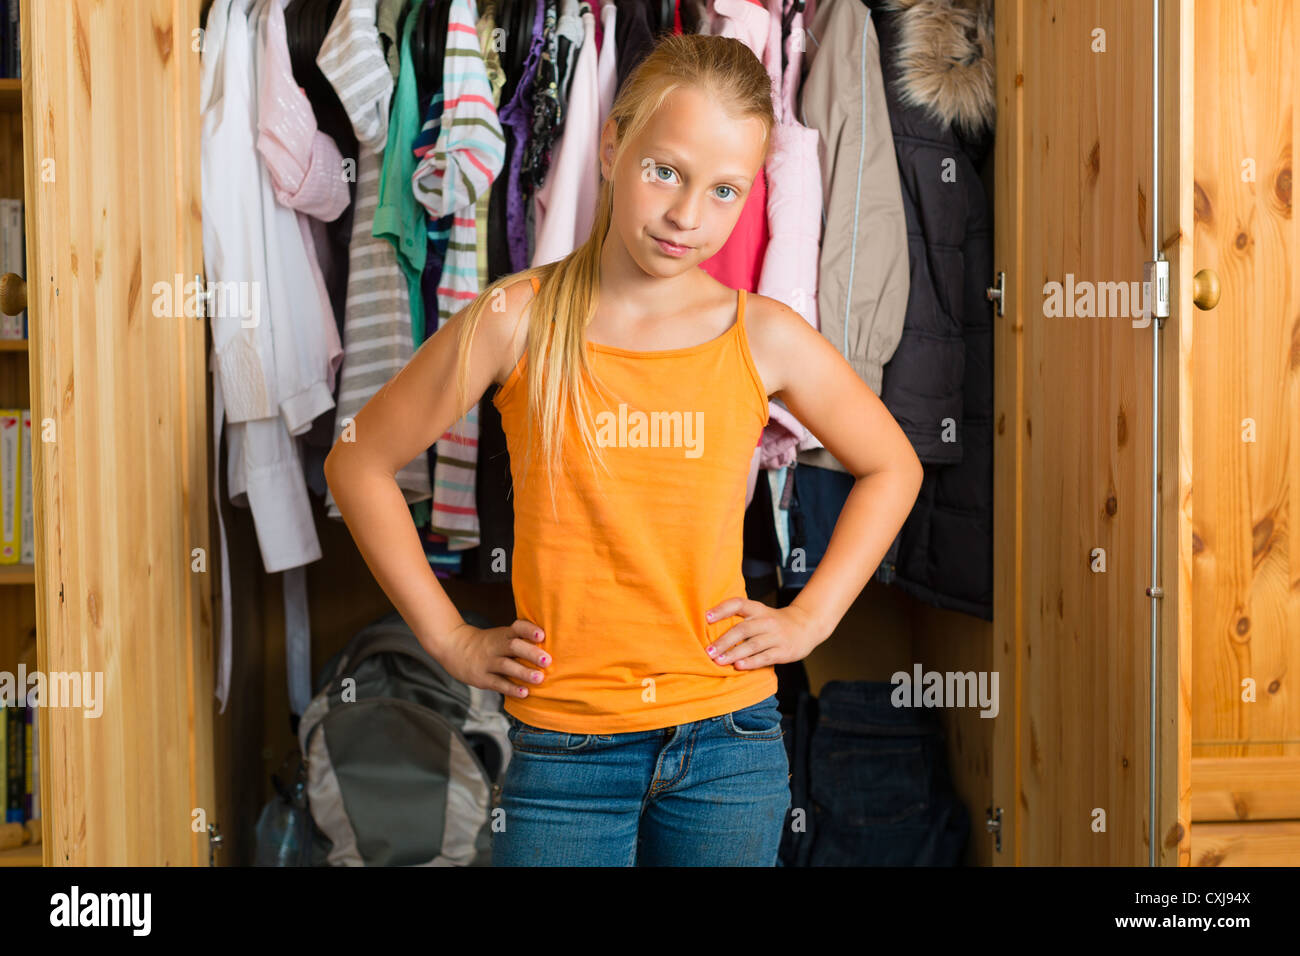 Family - child or teenager in front of her closet or wardrobe and looking for outfit Stock Photo